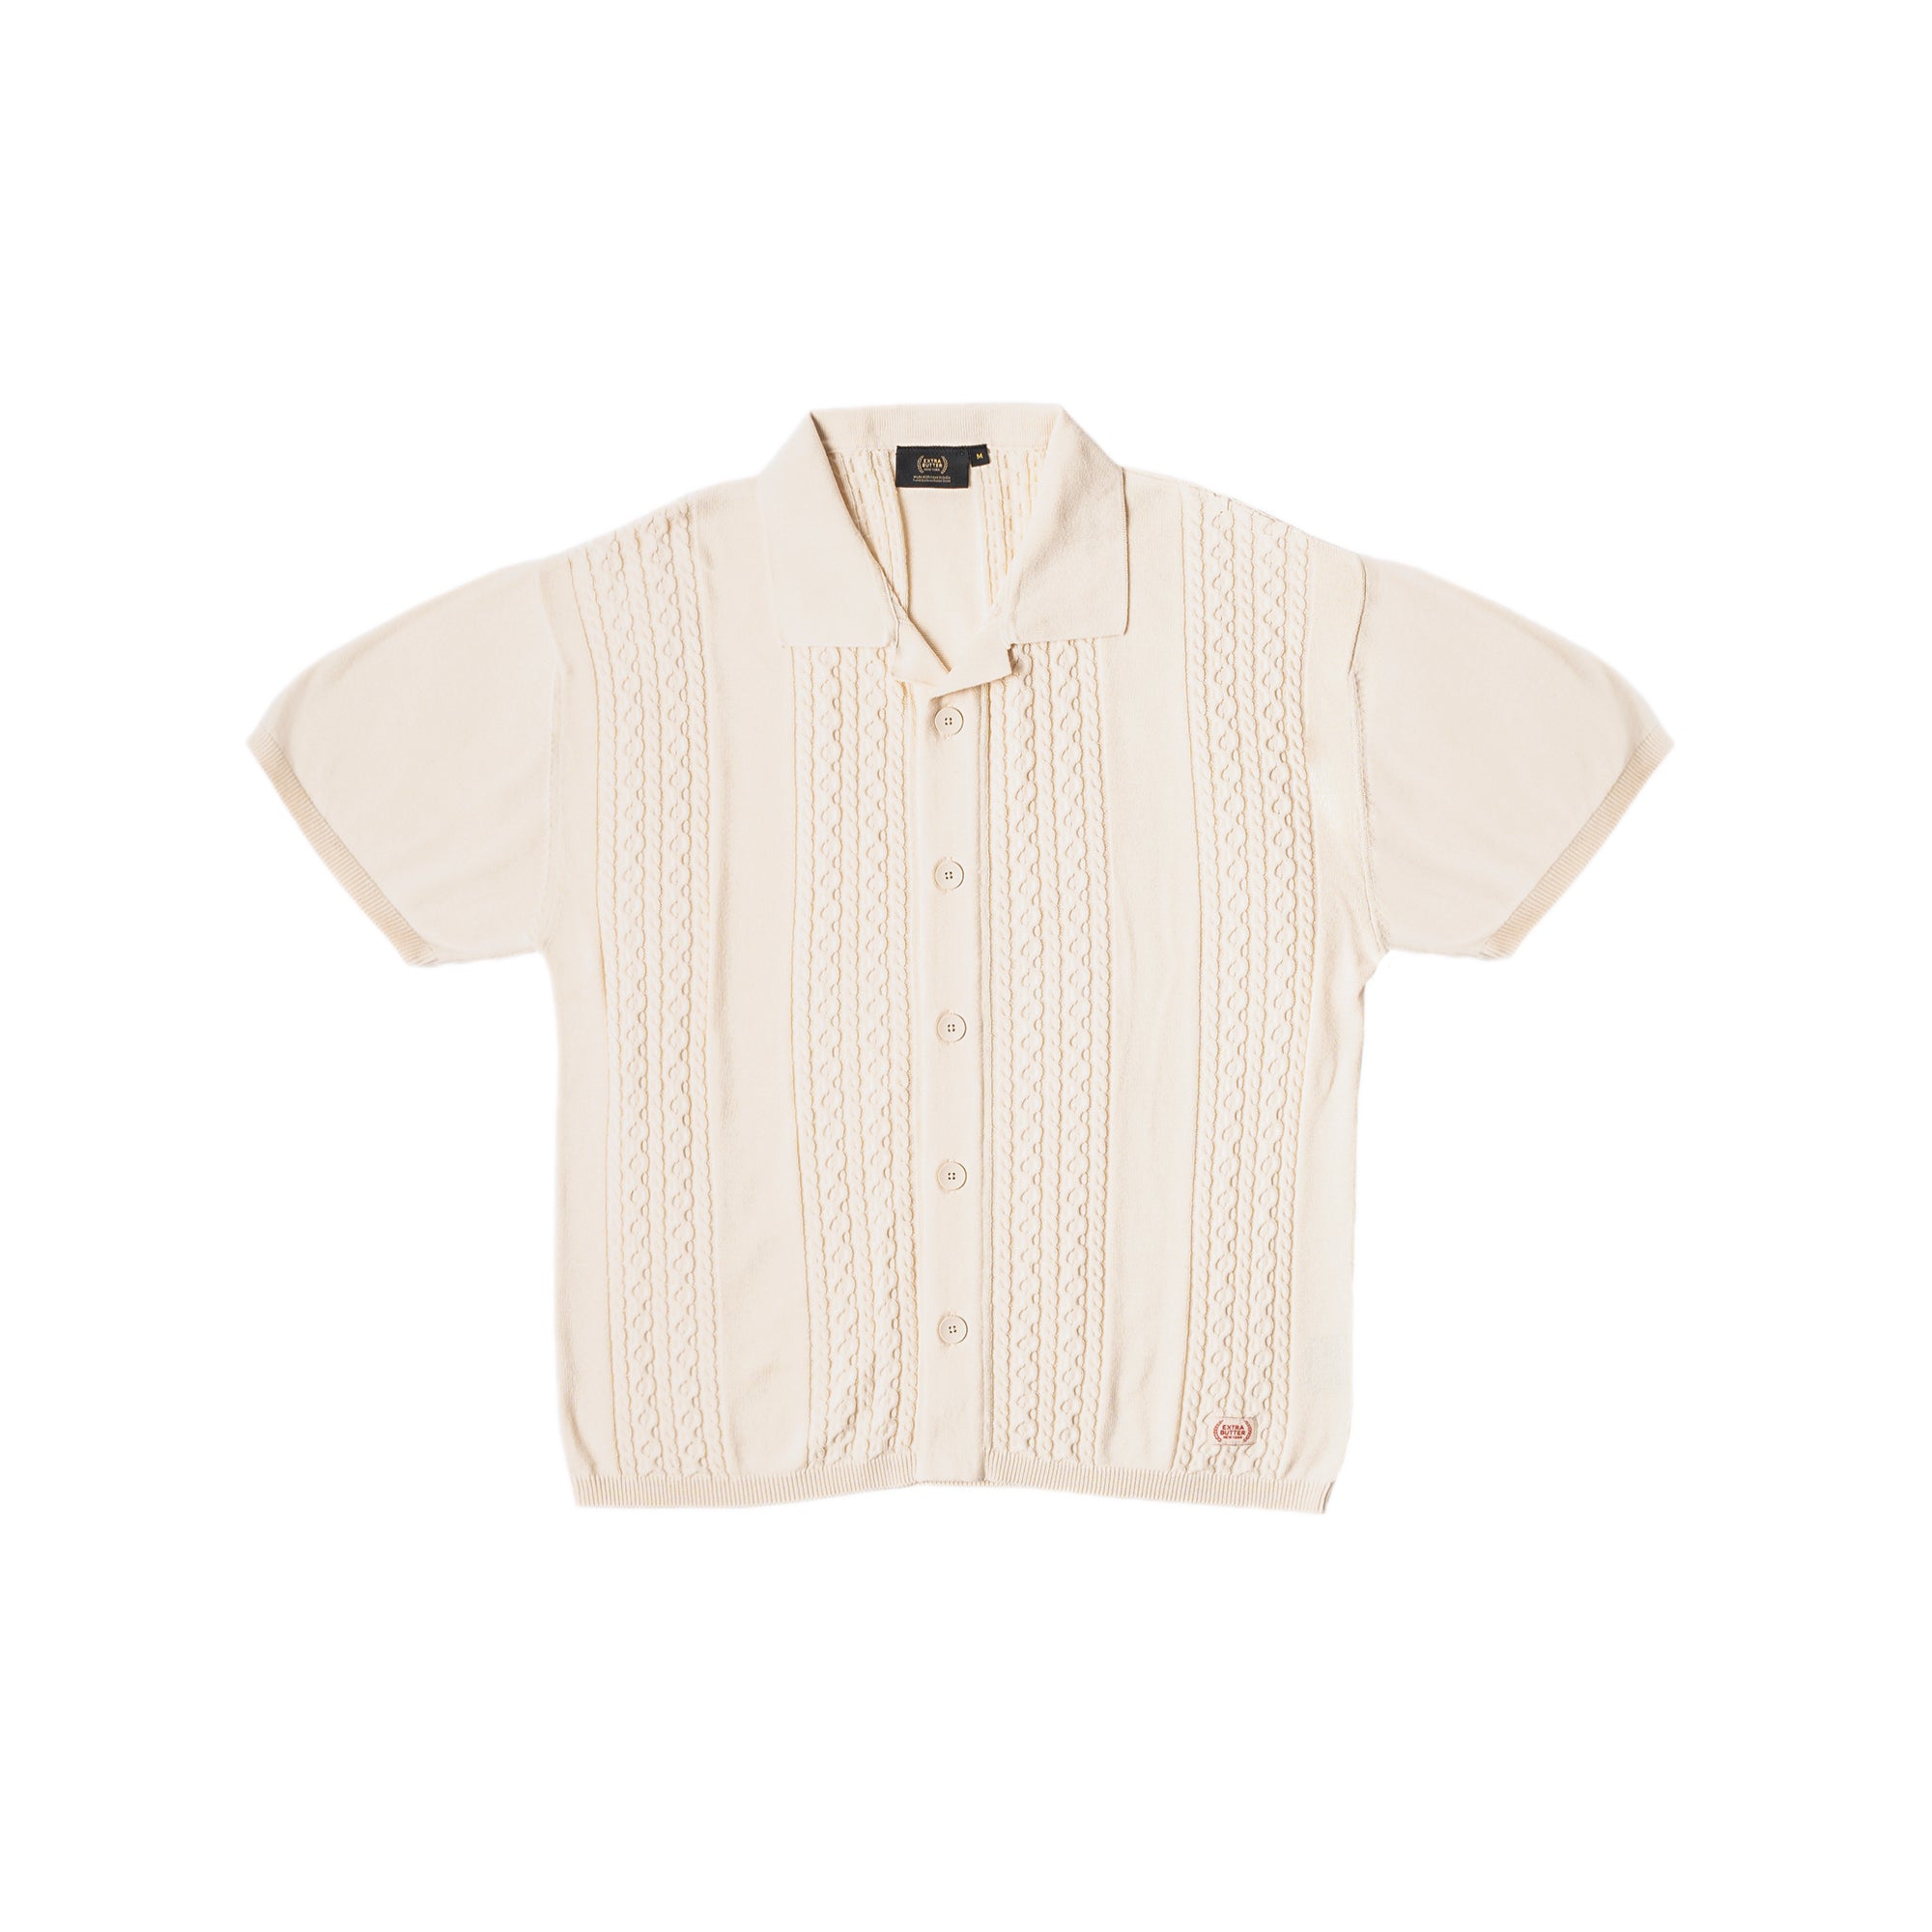 Extra Butter Cricket Club Cableknit Button Up Shirt card image